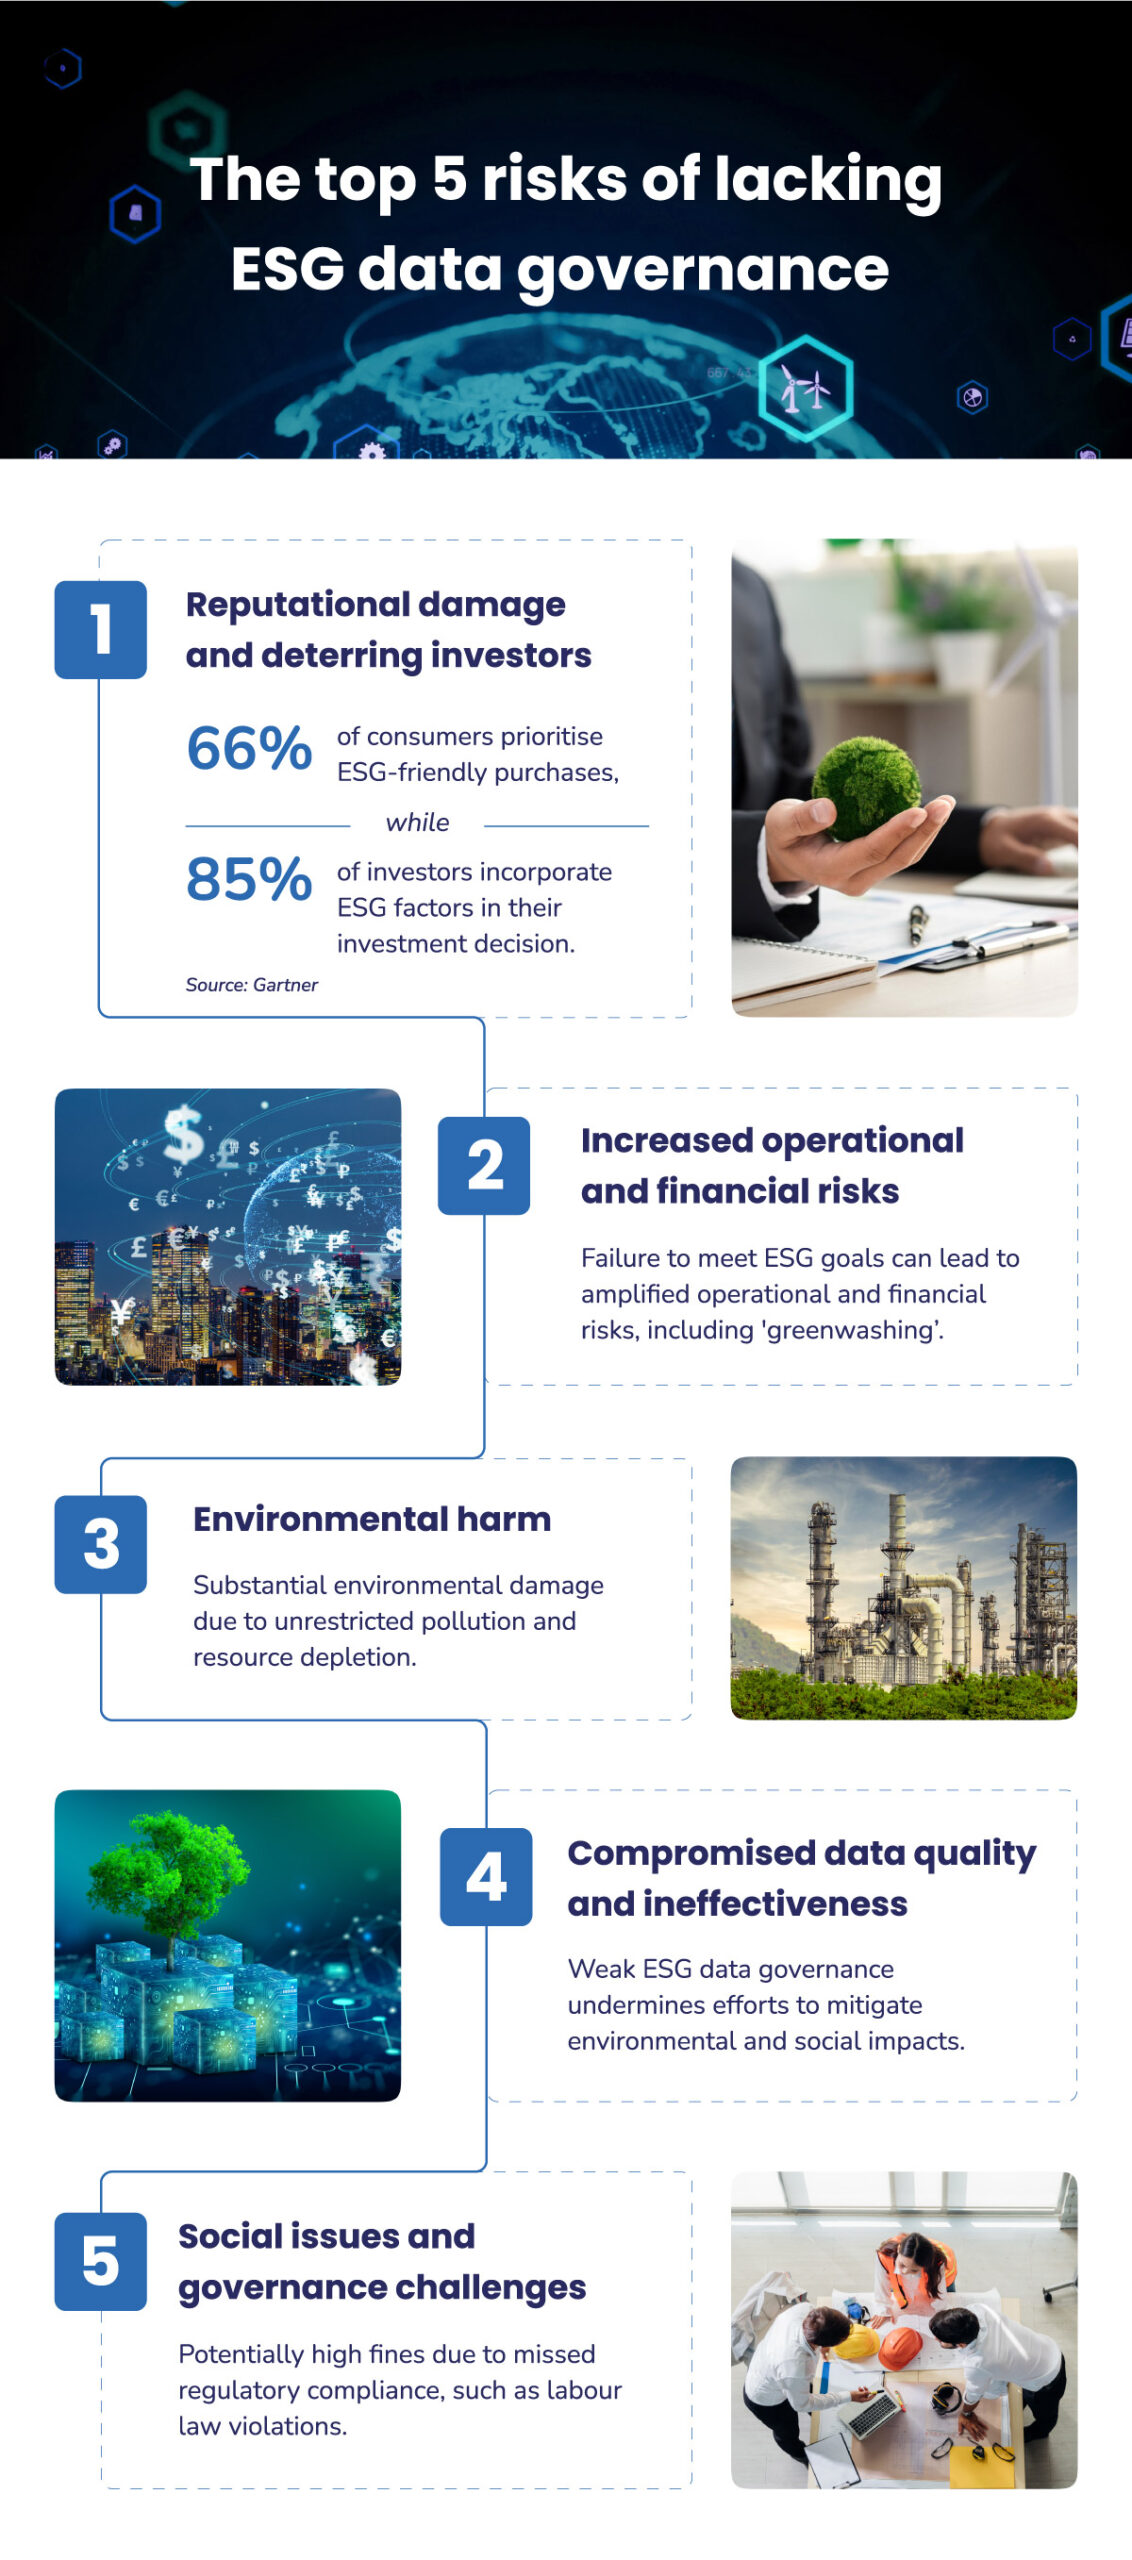 Infographic depicting the top 5 risks of lacking ESG data governance including damaged reputation, increased operational risk, environmental harm, poor data quality, and social/governance challenges.